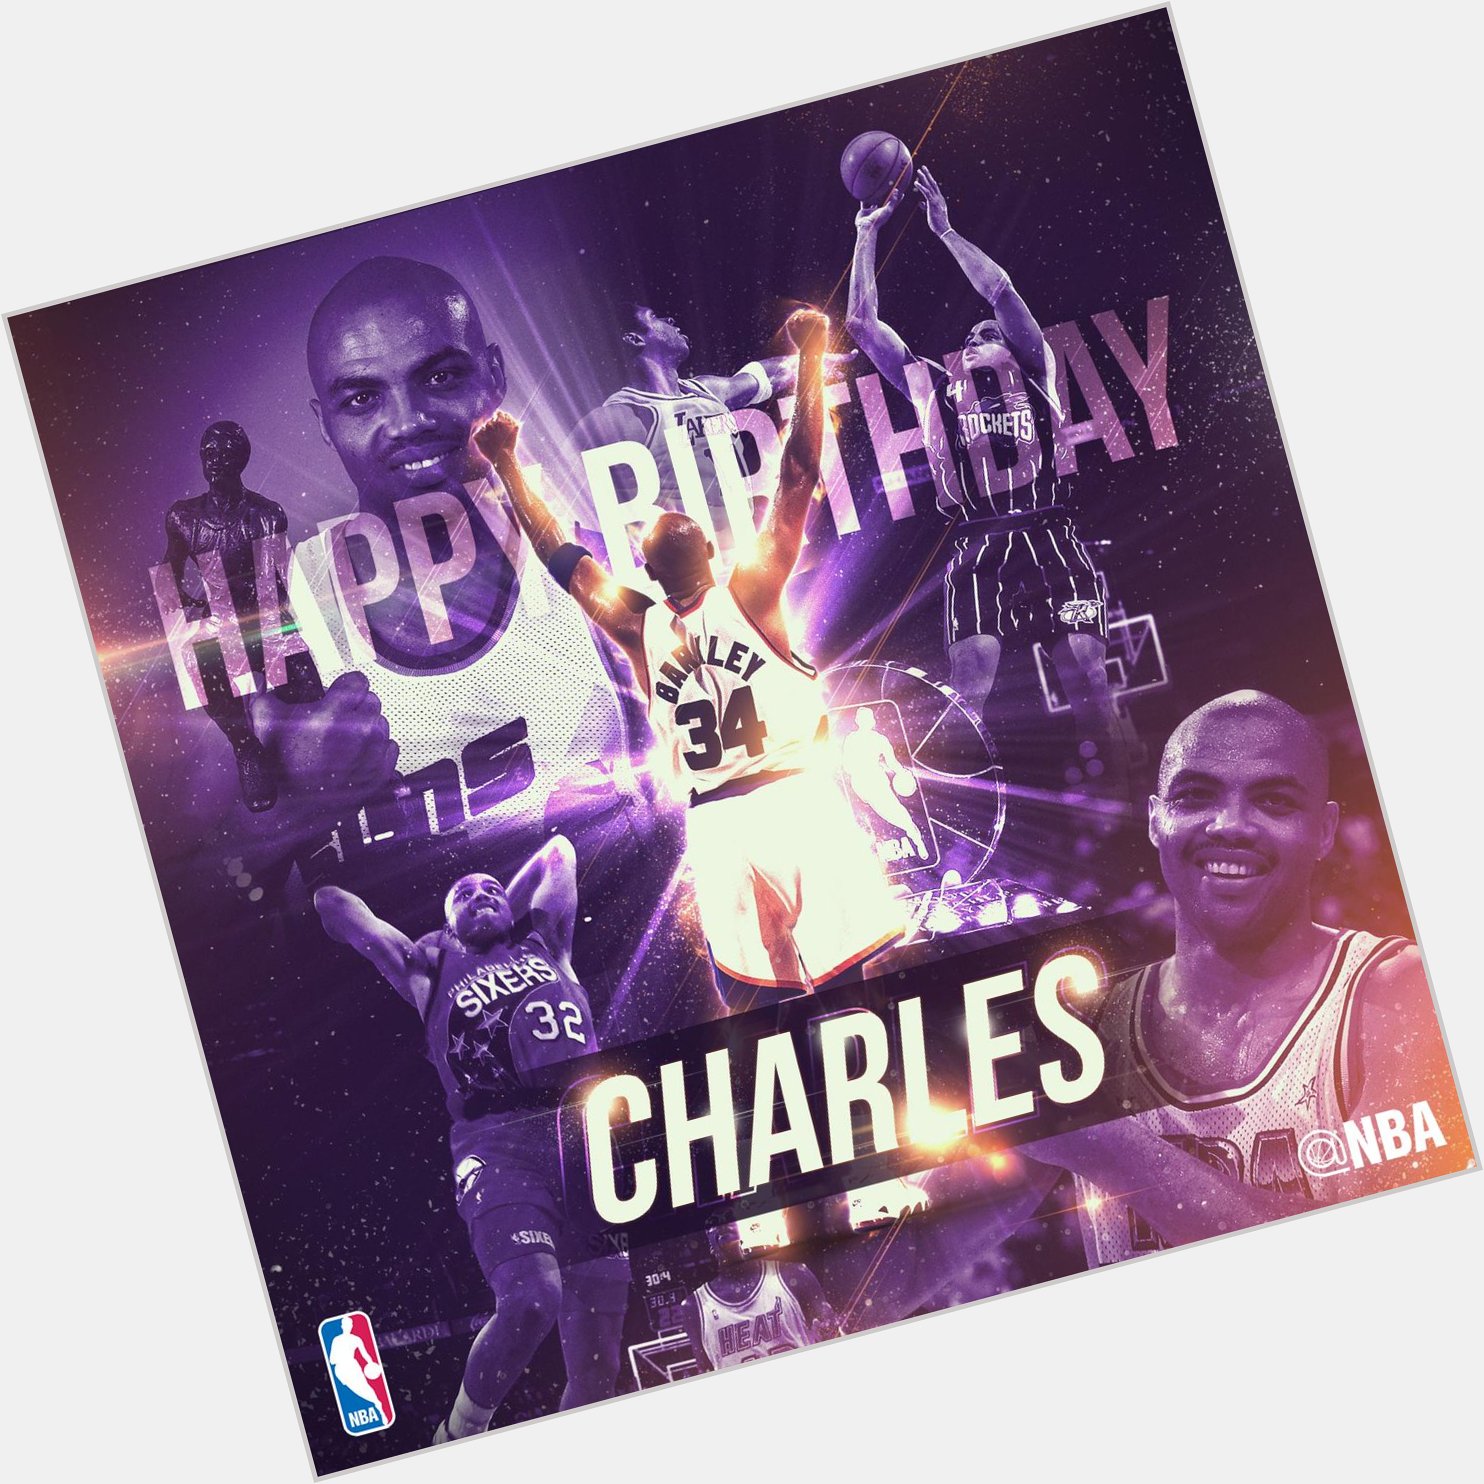 Join us in wishing CHARLES BARKLEY a HAPPY BIRTHDAY! 